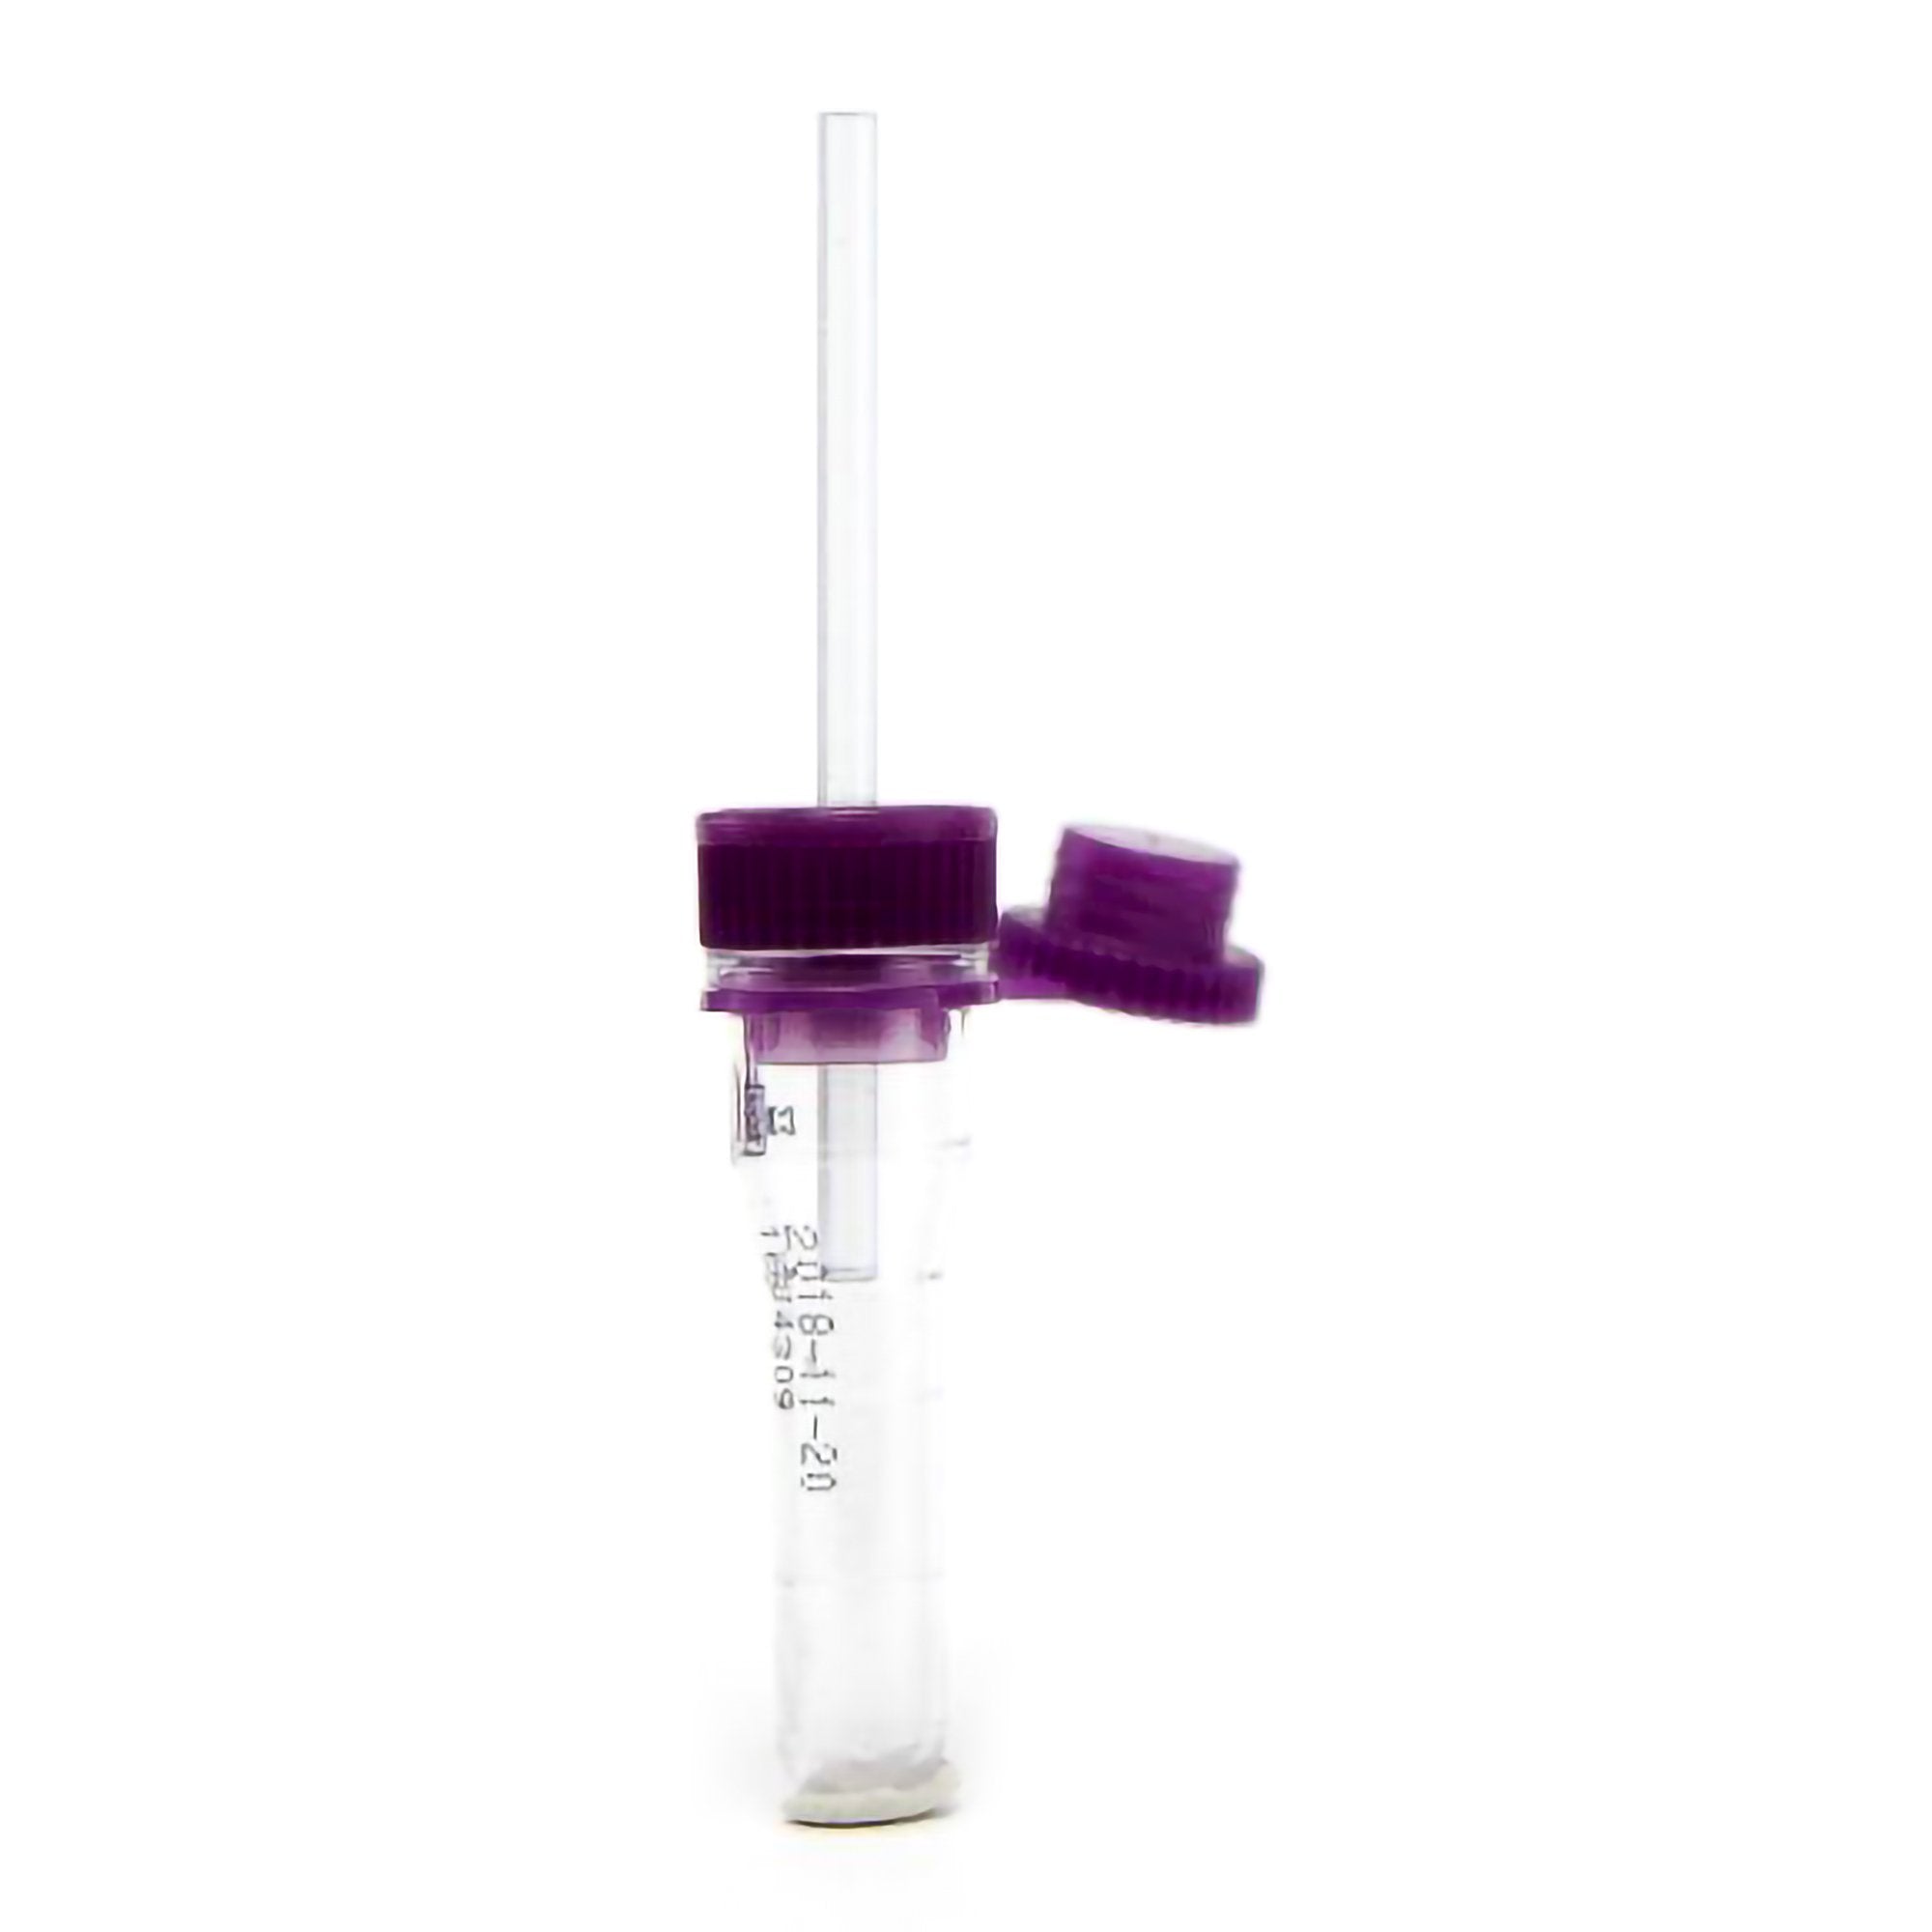 Safe-T-Fill Capillary Blood Collection Tube Whole Blood Tube K2 EDTA Additive 2.1 X 113 mm 150 L Purple Pierceable Attached Cap Plastic Tube